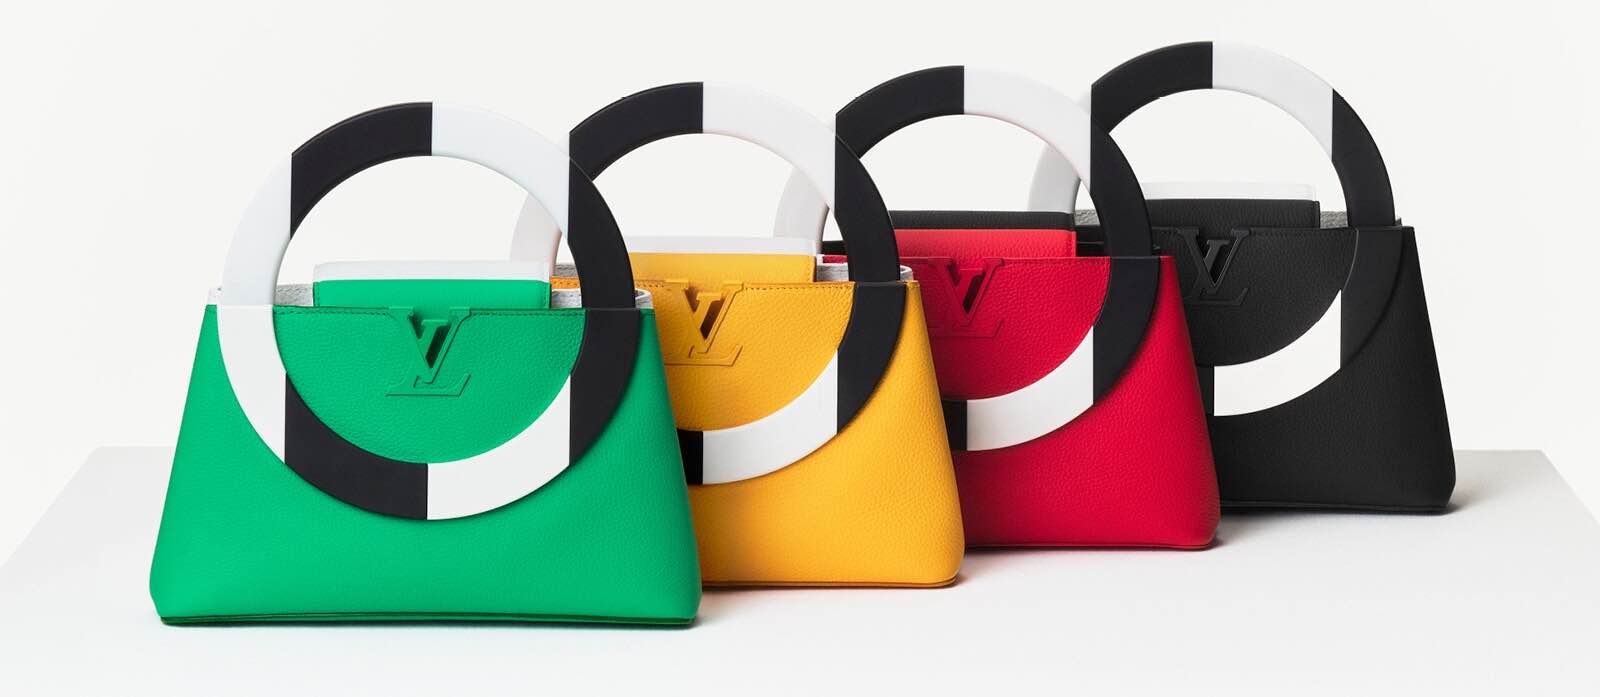 Louis Vuitton introduces the ArtyCapucines